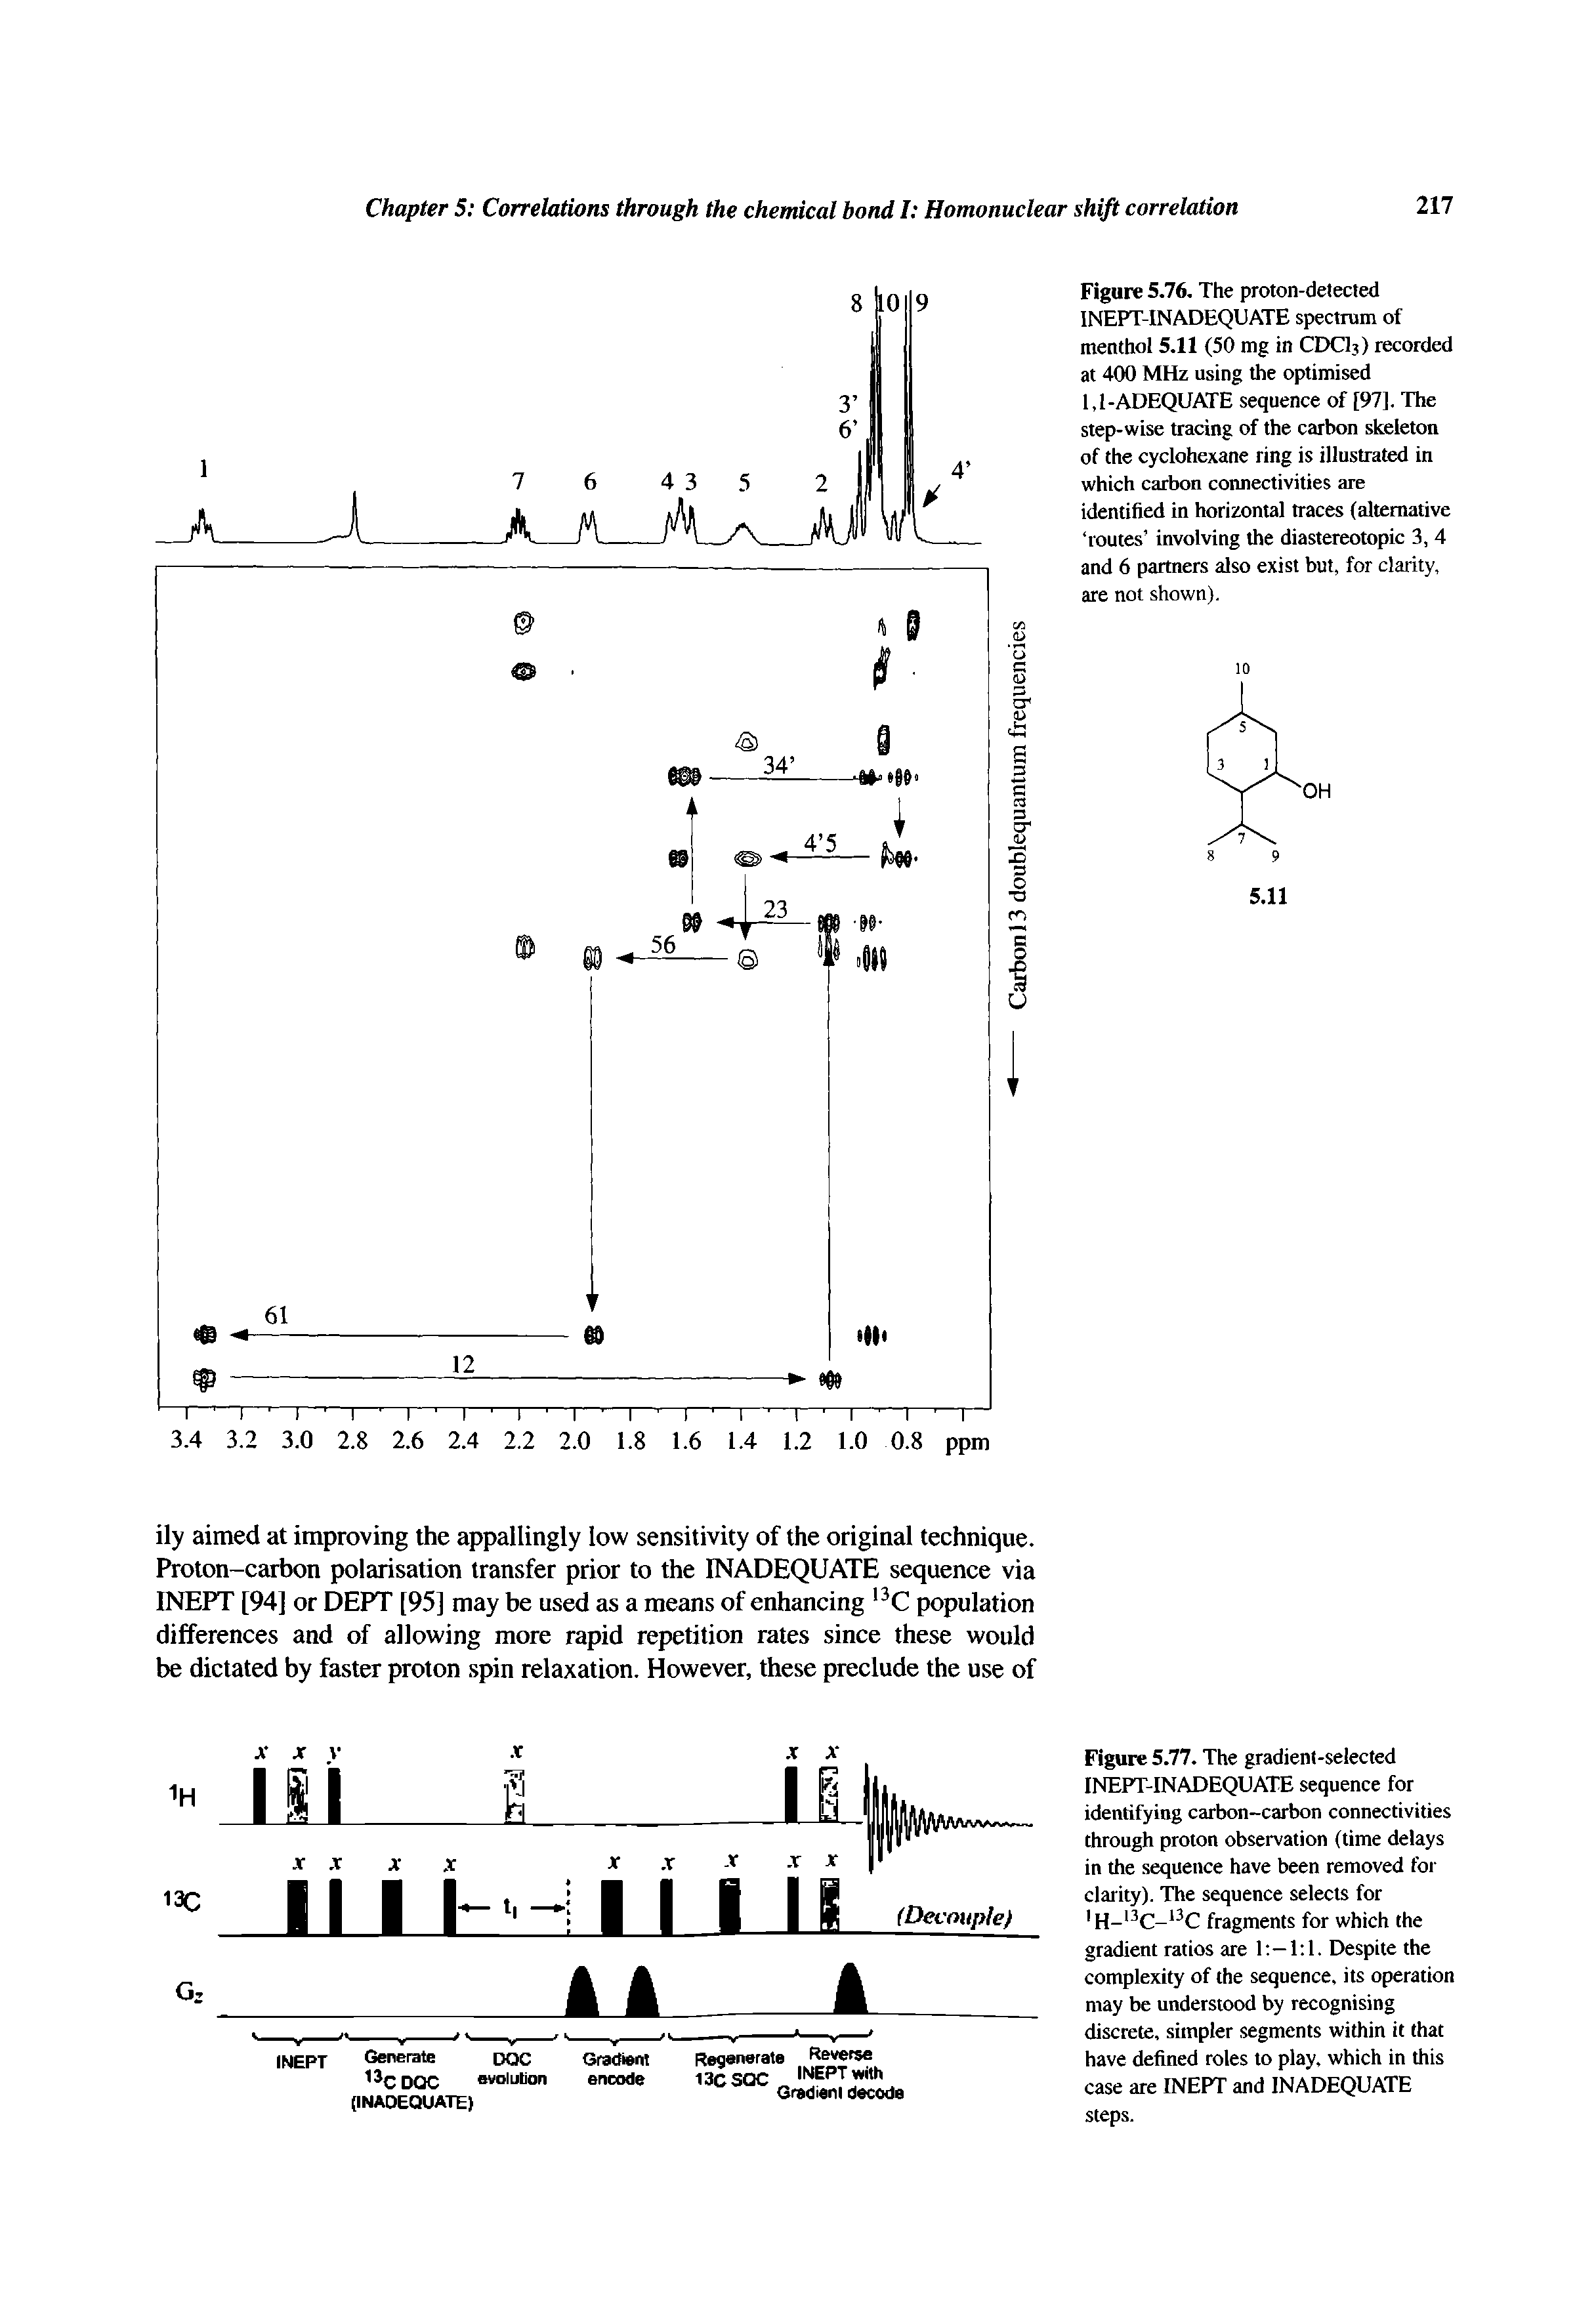 Figure 5.77. The gradient-selected INEPT-INADEQUATE sequence for identifying carbon-carbon connectivities through proton observation (time delays in the sequence have been removed for clarity). The sequence selects for H- C- C fragments for which the gradient ratios are 1 —1 1. Despite the complexity of the sequence, its operation may be understood by recognising discrete, simpler segments within it that have defined roles to play, which in this case are INEPT and INADEQUATE steps.